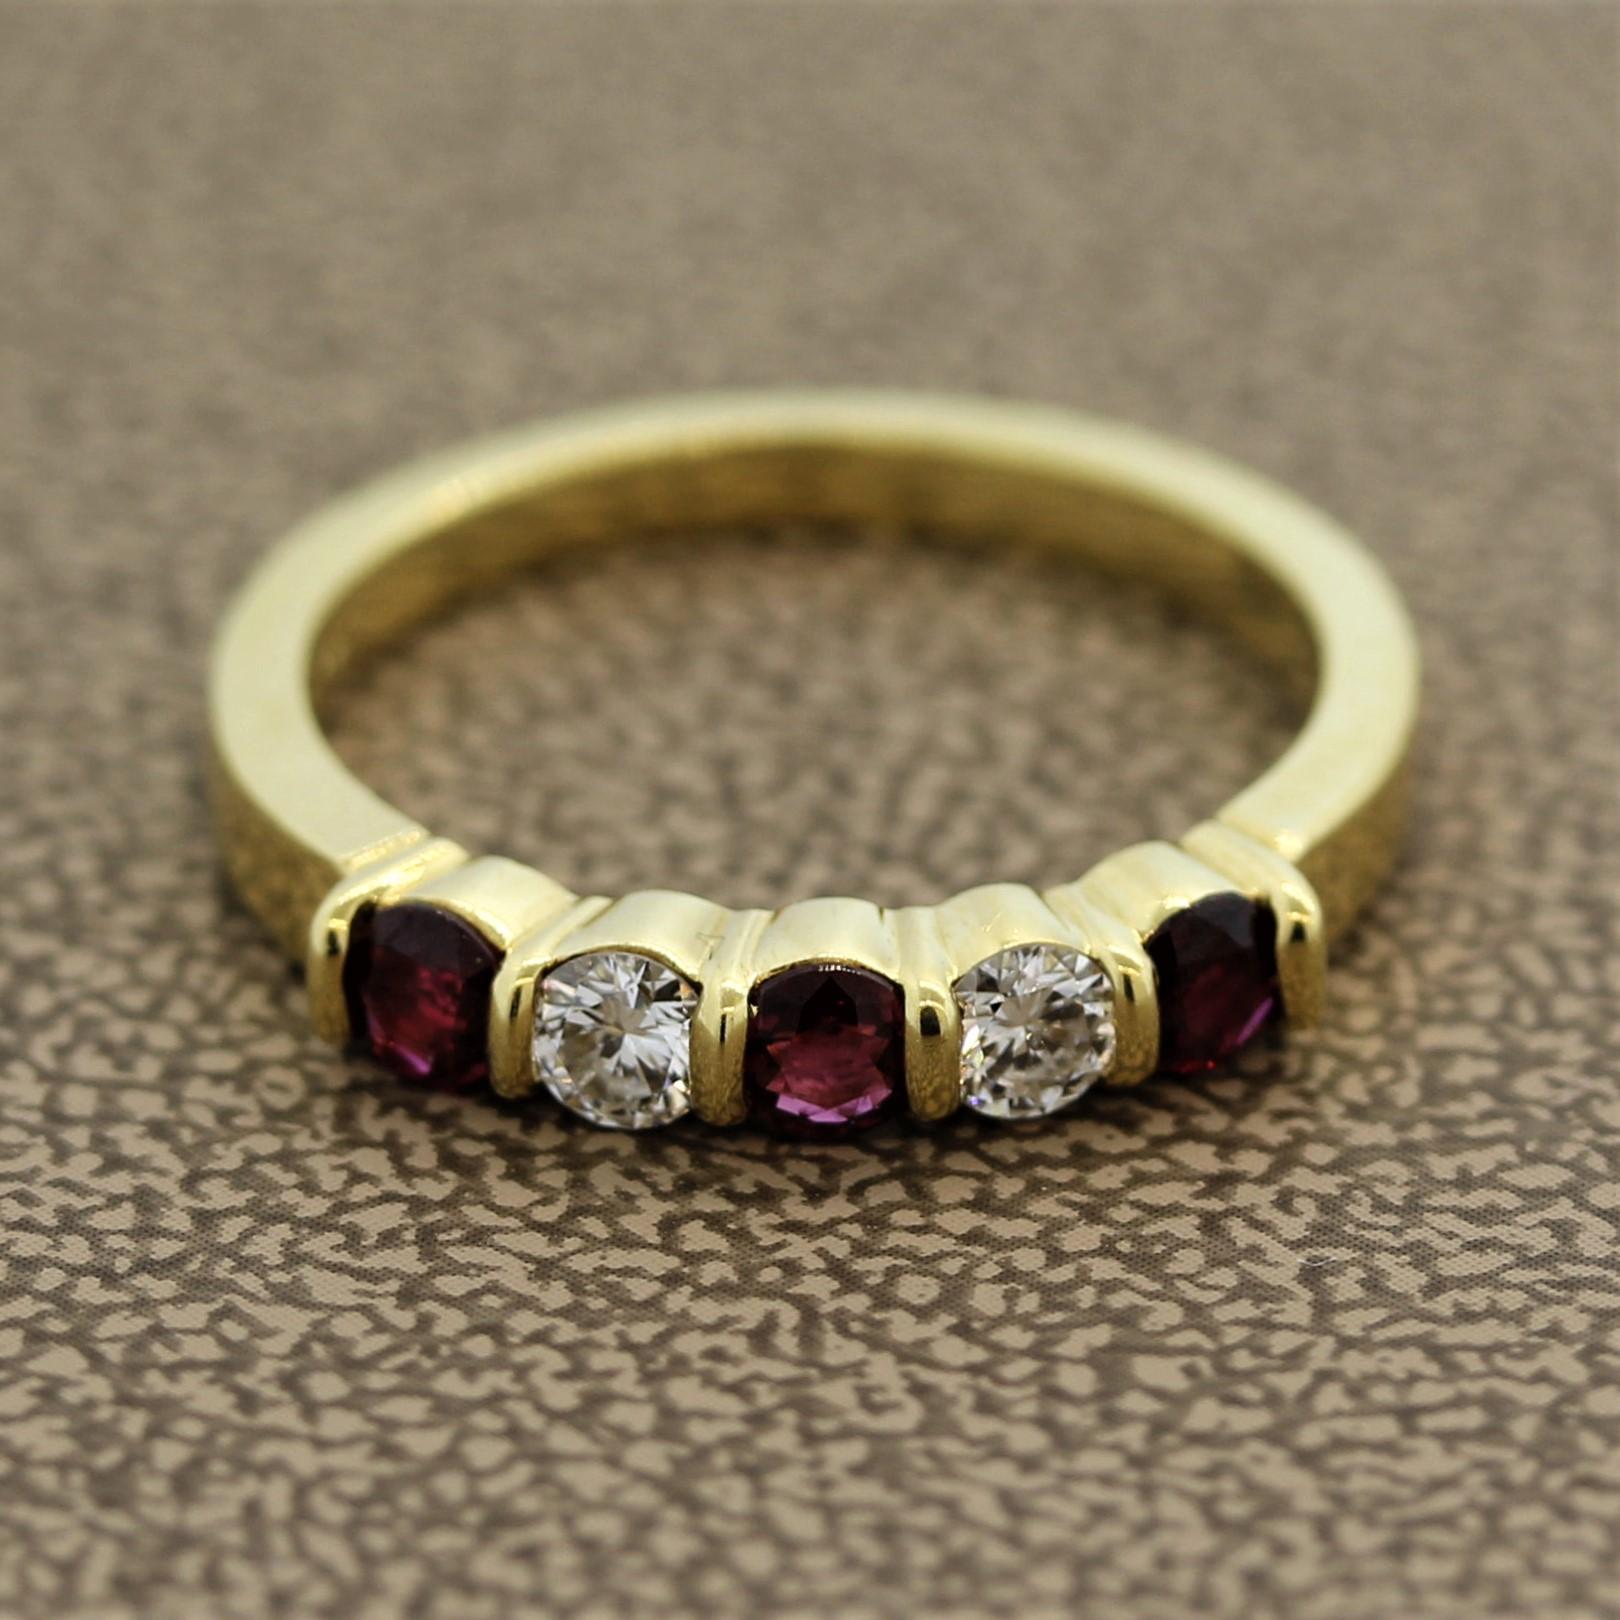 A classic piece by Gemlok, this band features 3 round cut rubies with a vivid red color weighing 0.30 carats. Adding to that are 2 round brilliant cut diamonds weighing 0.25 carats and are set in between the rubies. Made in 18 yellow gold with fine